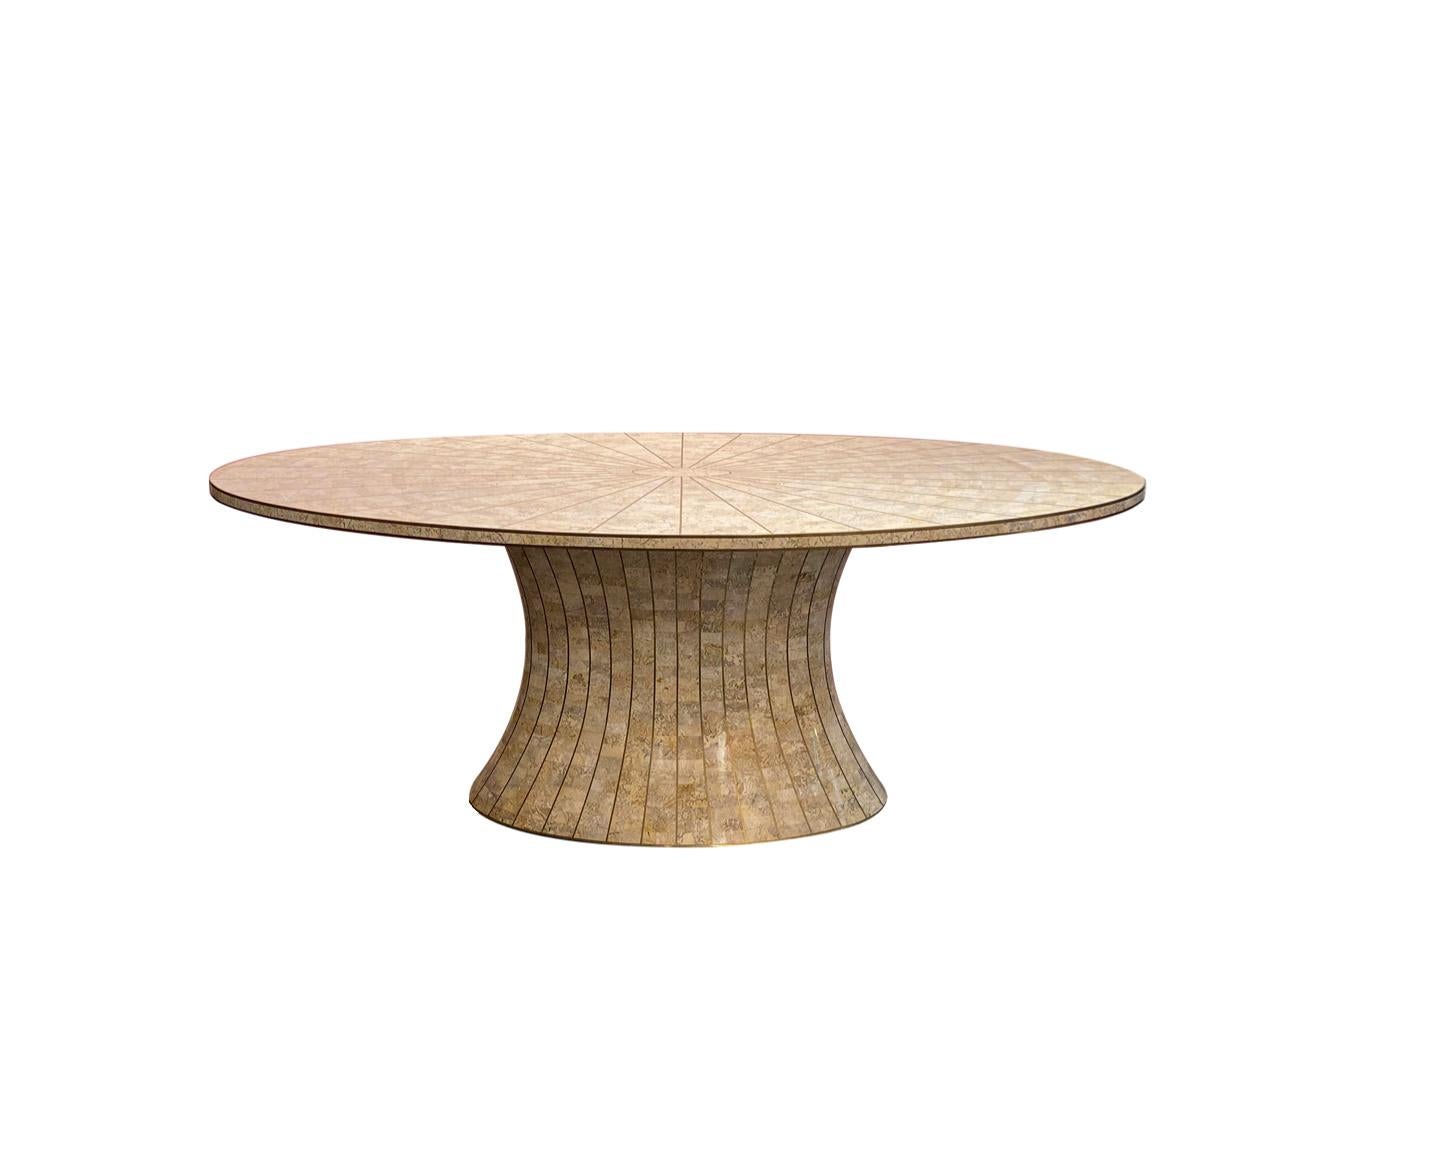 A true masterpiece of craftsmanship, Beautiful oval tessellated stone dining table and brass inlay by Maitland Smith philippines.

The brass inlay draws the eye to both the tabletop and the tapered base, making it a veritable architectural and